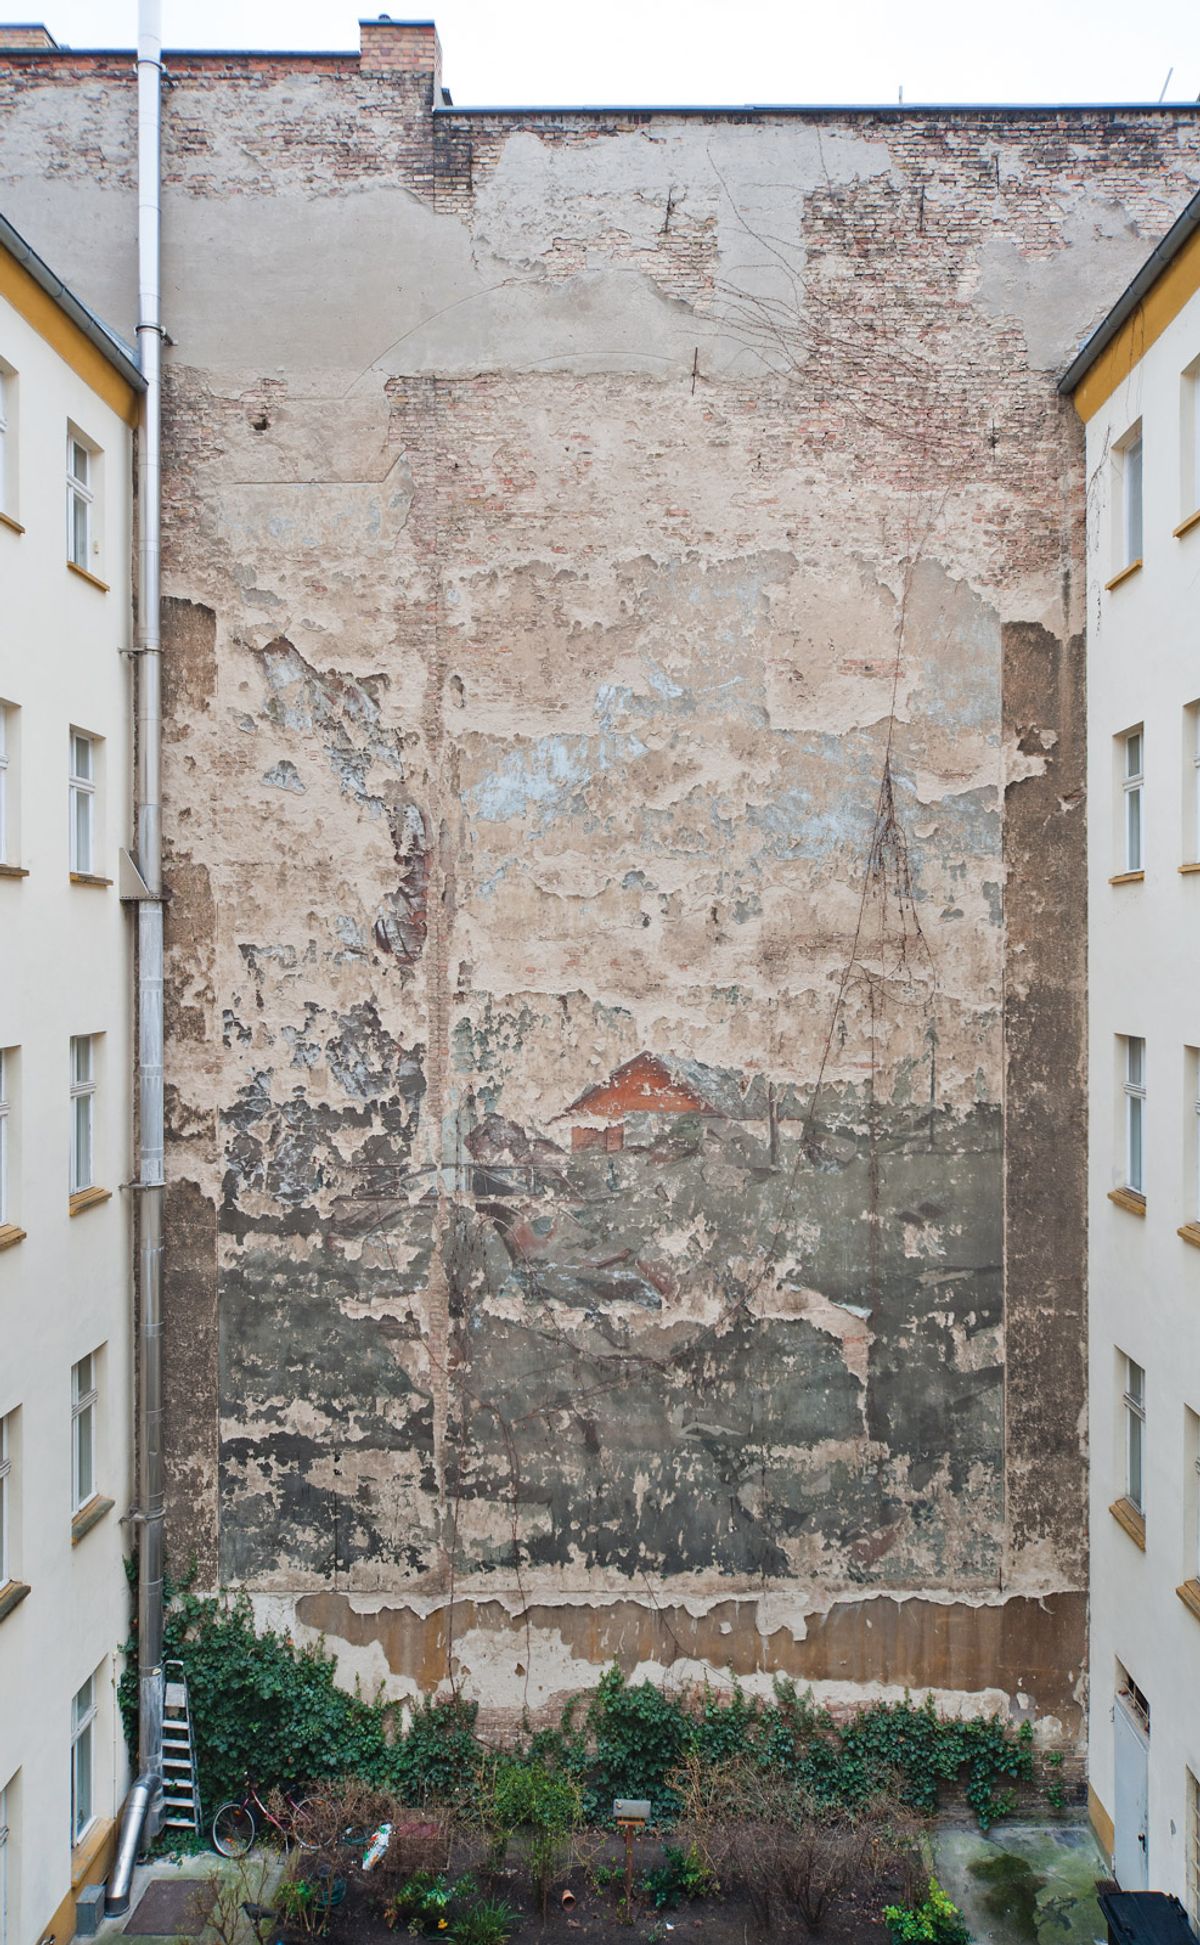 One of the remaining courtyard murals in central Berlin that will be restored Wolfgang Bittner